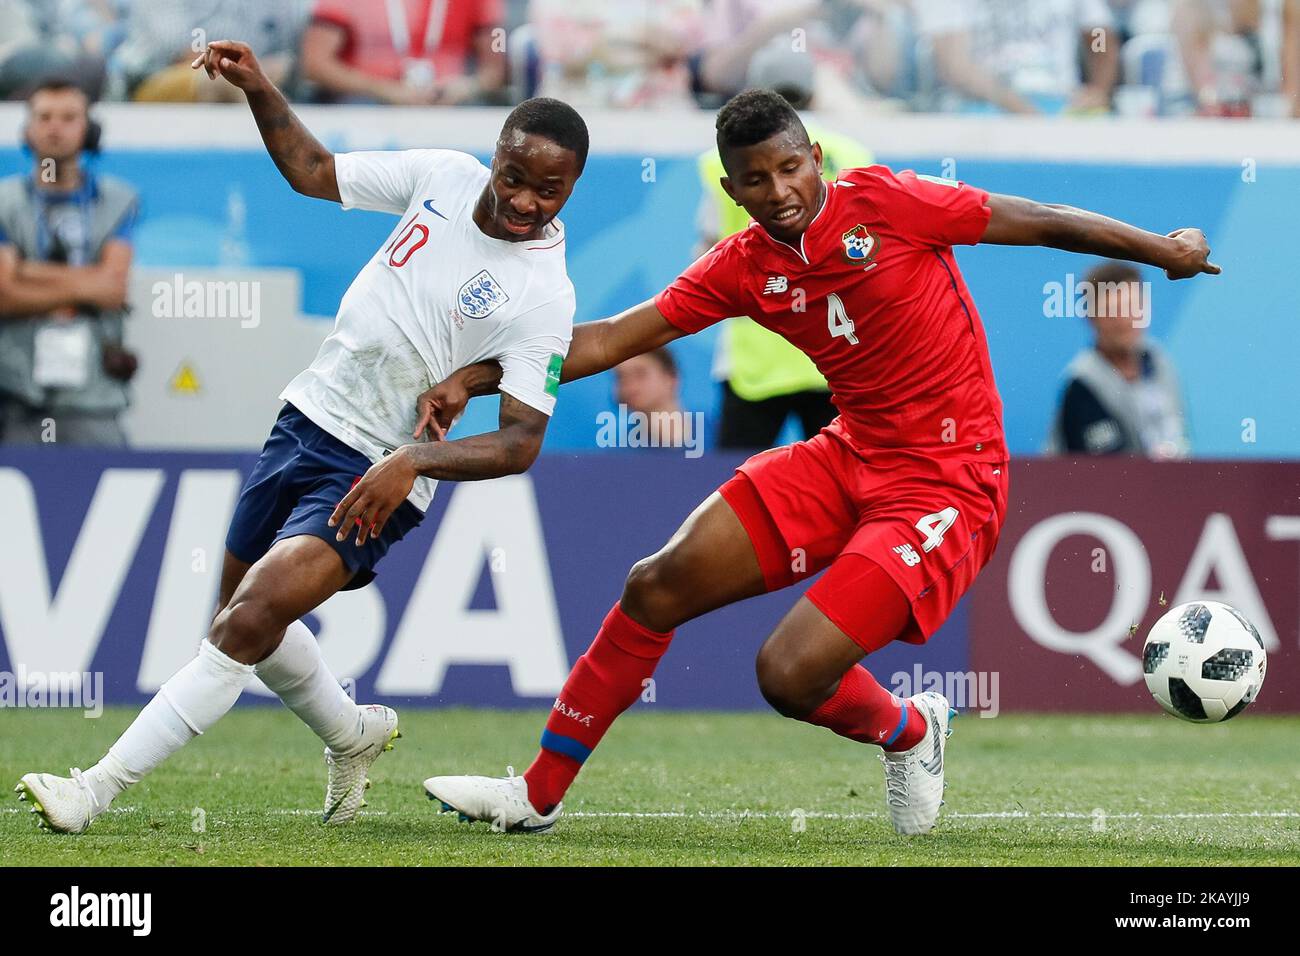 Raheem Sterling (L) of England national team and Fidel Escobar of Panama national team vie for the ball during the 2018 FIFA World Cup Russia group G match between England and Panama on June 24, 2018 at Nizhny Novgorod Stadium in Nizhny Novgorod, Russia. (Photo by Mike Kireev/NurPhoto) Stock Photo